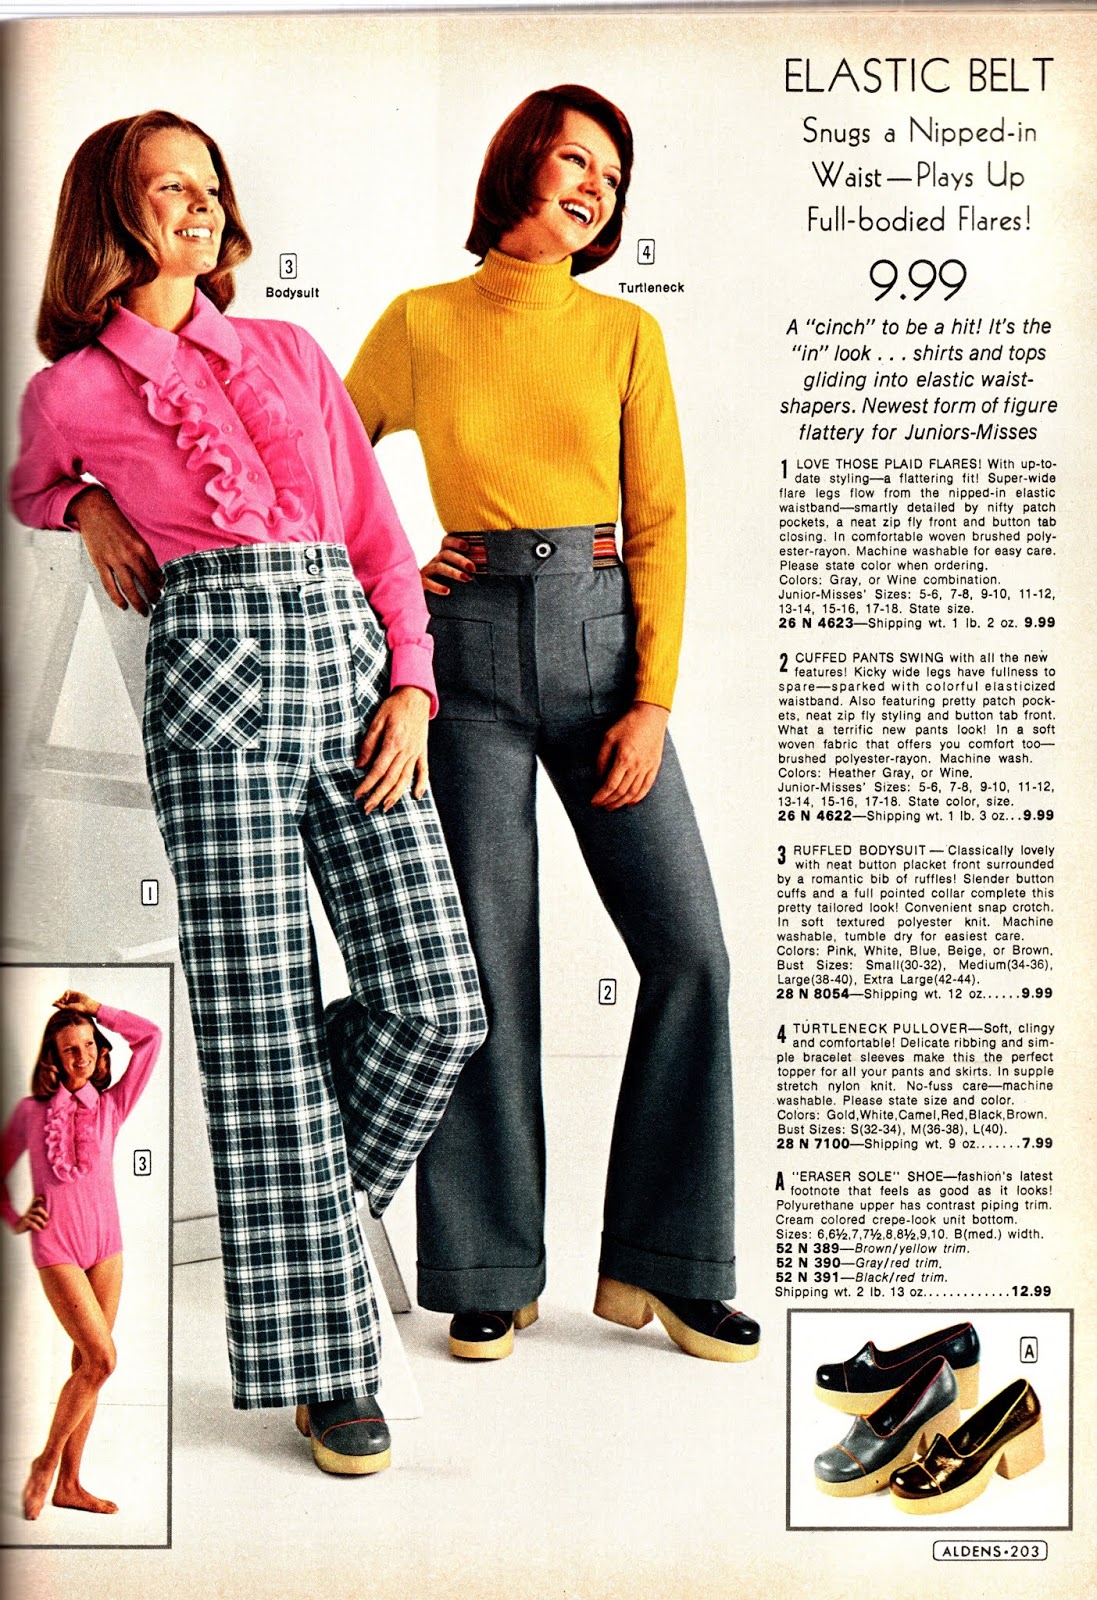 Kathy Loghry Blogspot: When Life Was Groovy: Bodysuits and Pants!!